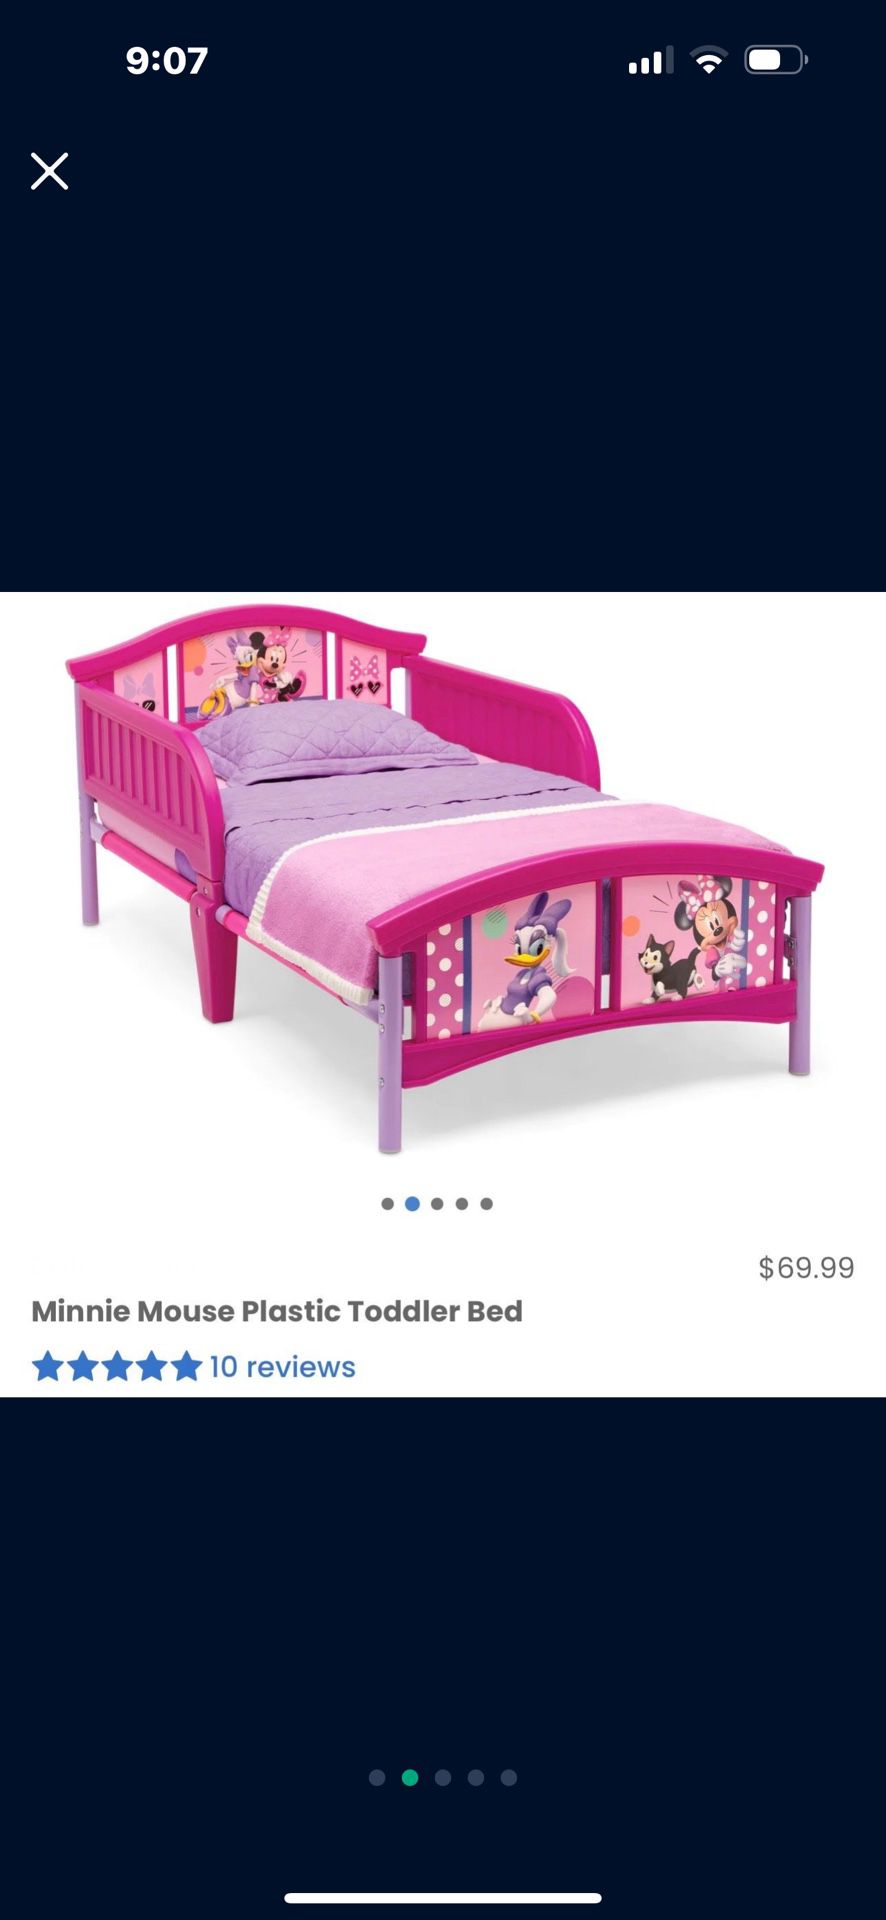 New Minnie Mouse Toddler Bed With Legs (mattress Not Included)